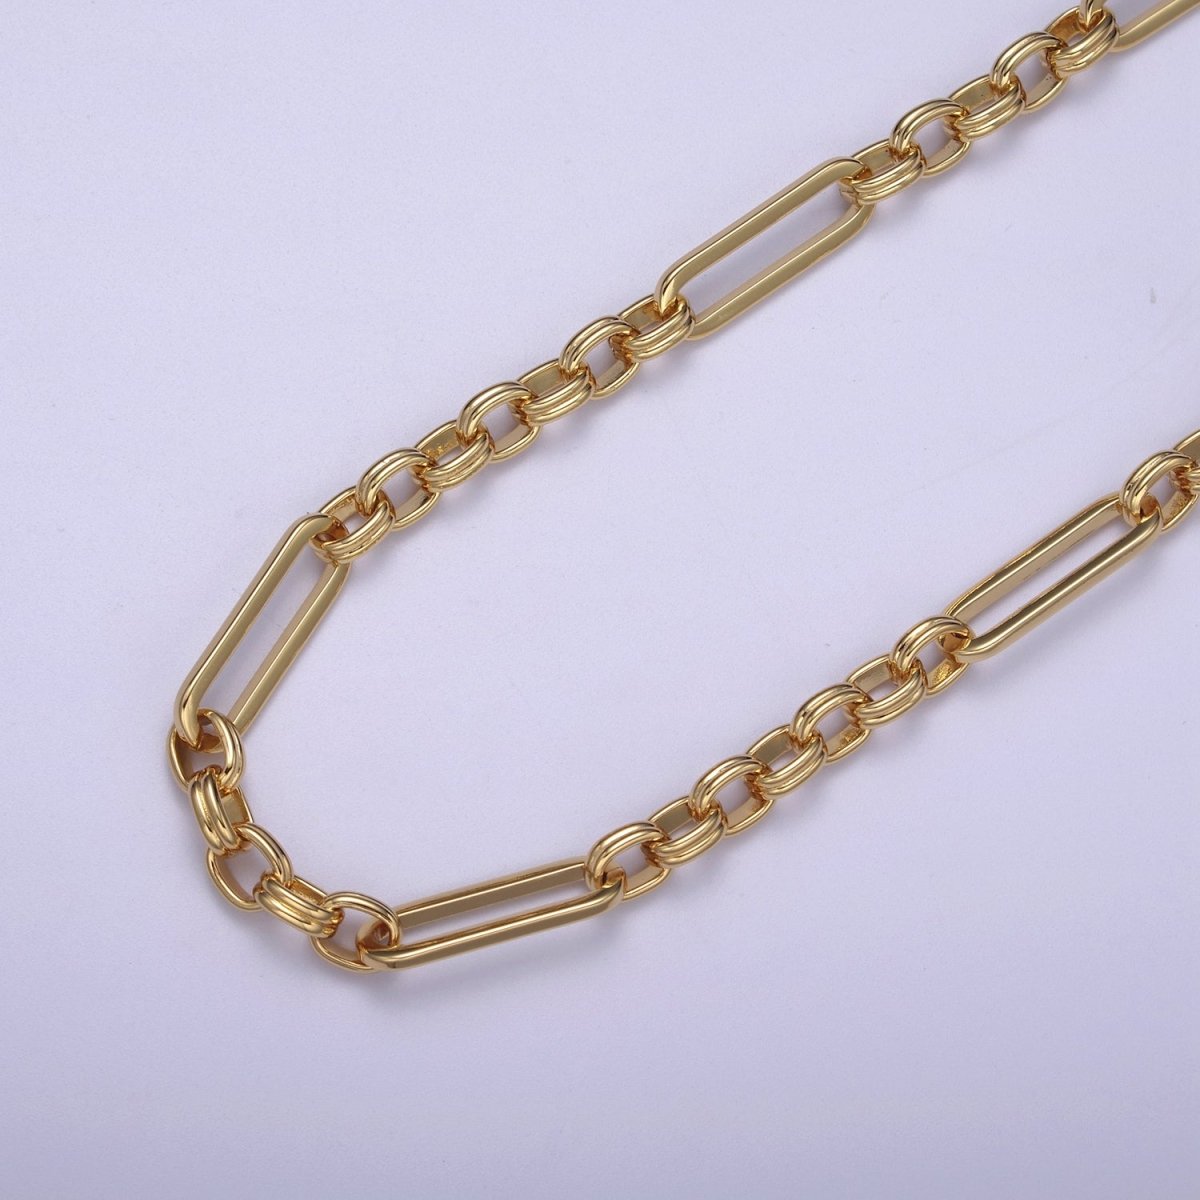 24K Gold Filled Unique ROLO Paperclip Long and Short Chain 20.5X6.3mm Paper Clip Chain with Double Cable Link, Unfinished Chain For Jewelry Making | ROLL-656 Clearance Pricing - DLUXCA